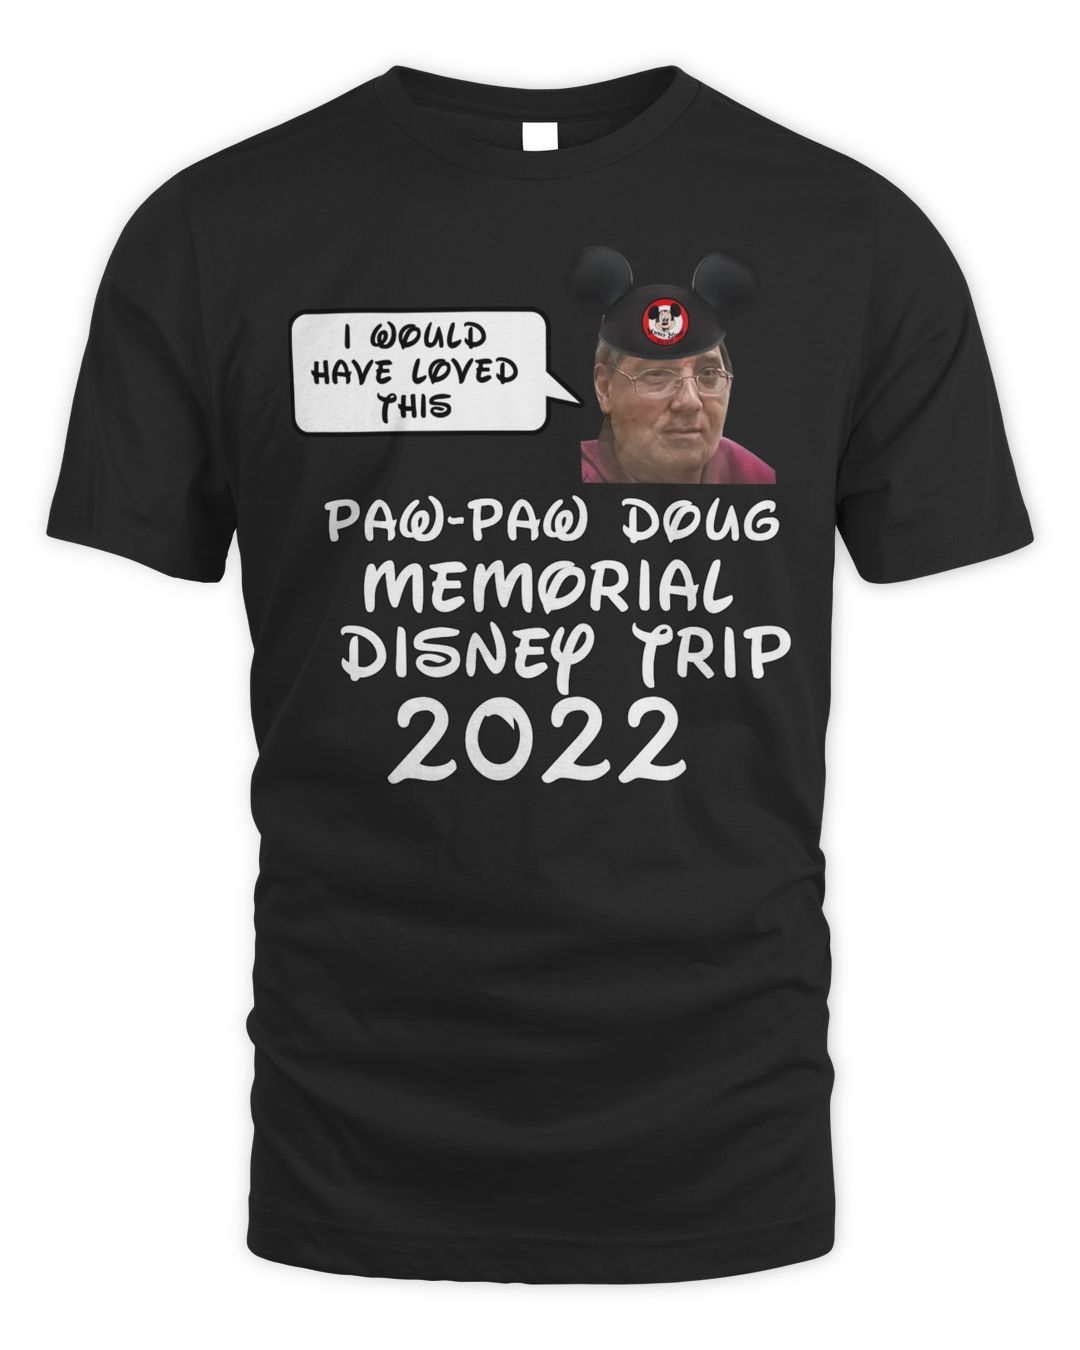 The Mcelroy I Would Have Loved This Trip 2022 Shirt